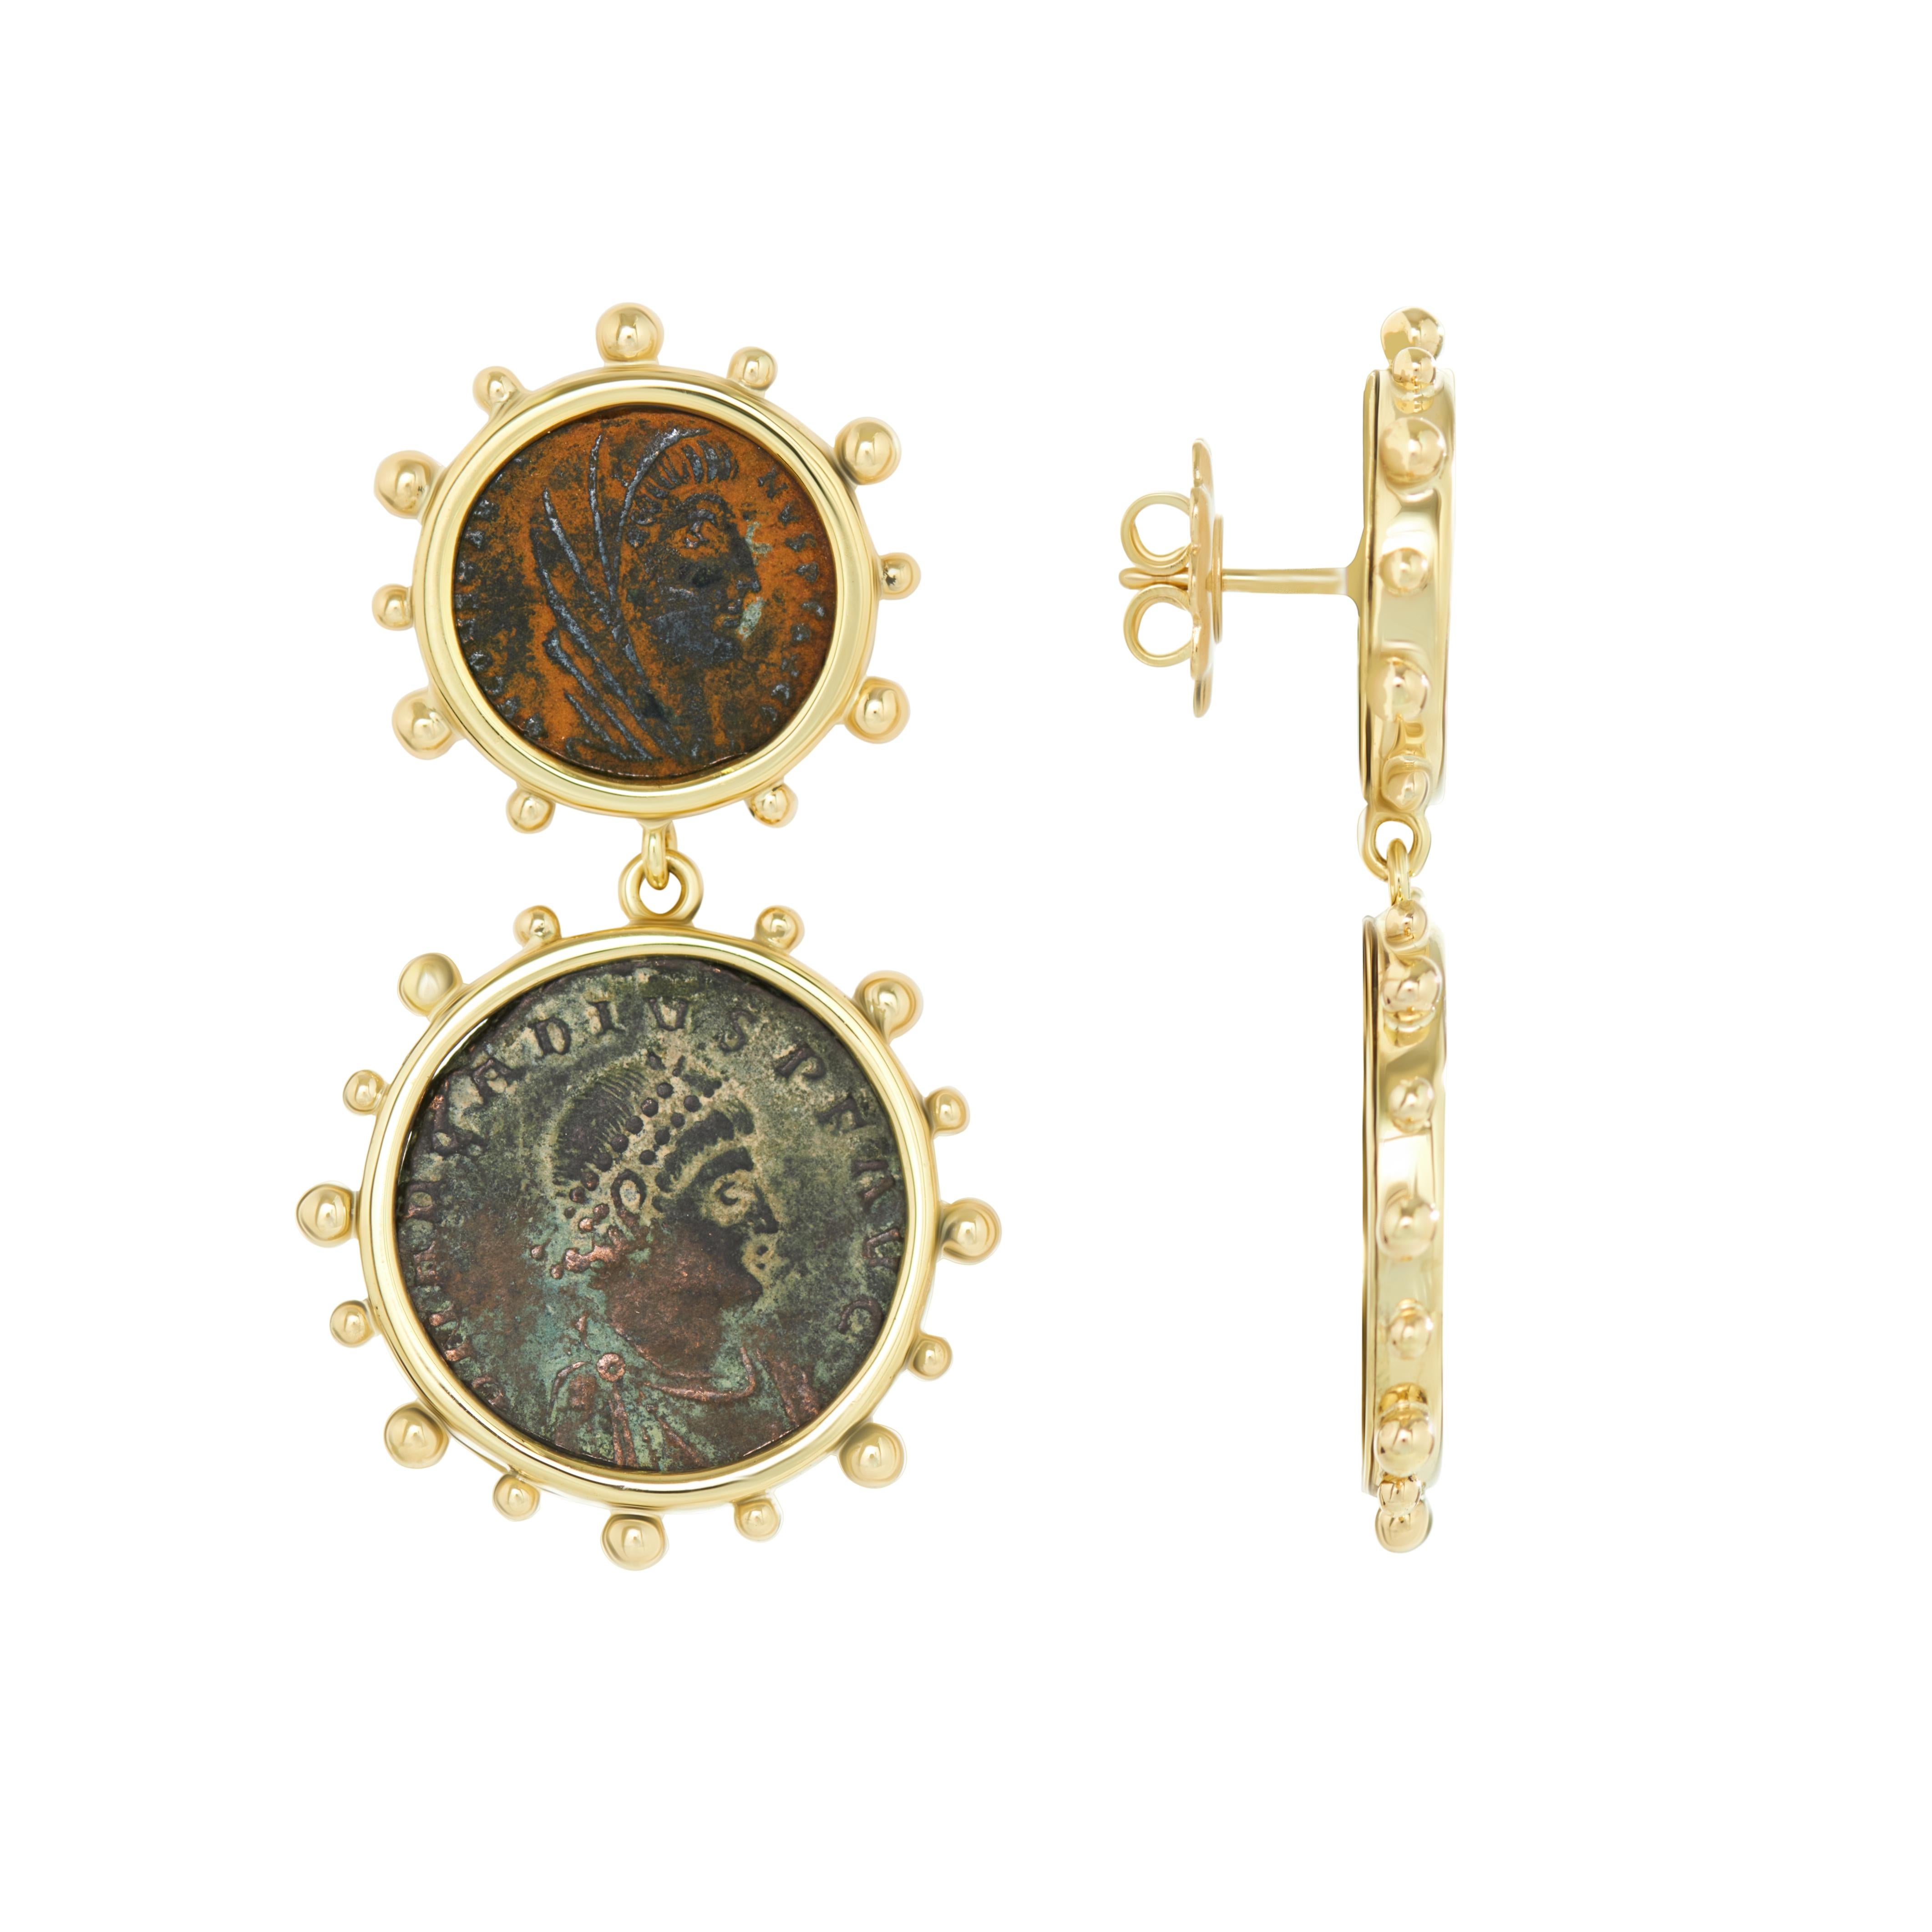 These Dubini coin earrings from the 'Empires' collection feature authentic Roman Imperial bronze coins set in 18K yellow gold.

ABOUT THE COINS

Patina is that beautiful and brilliant kind of time-created varnish, of a green or brownish colour,